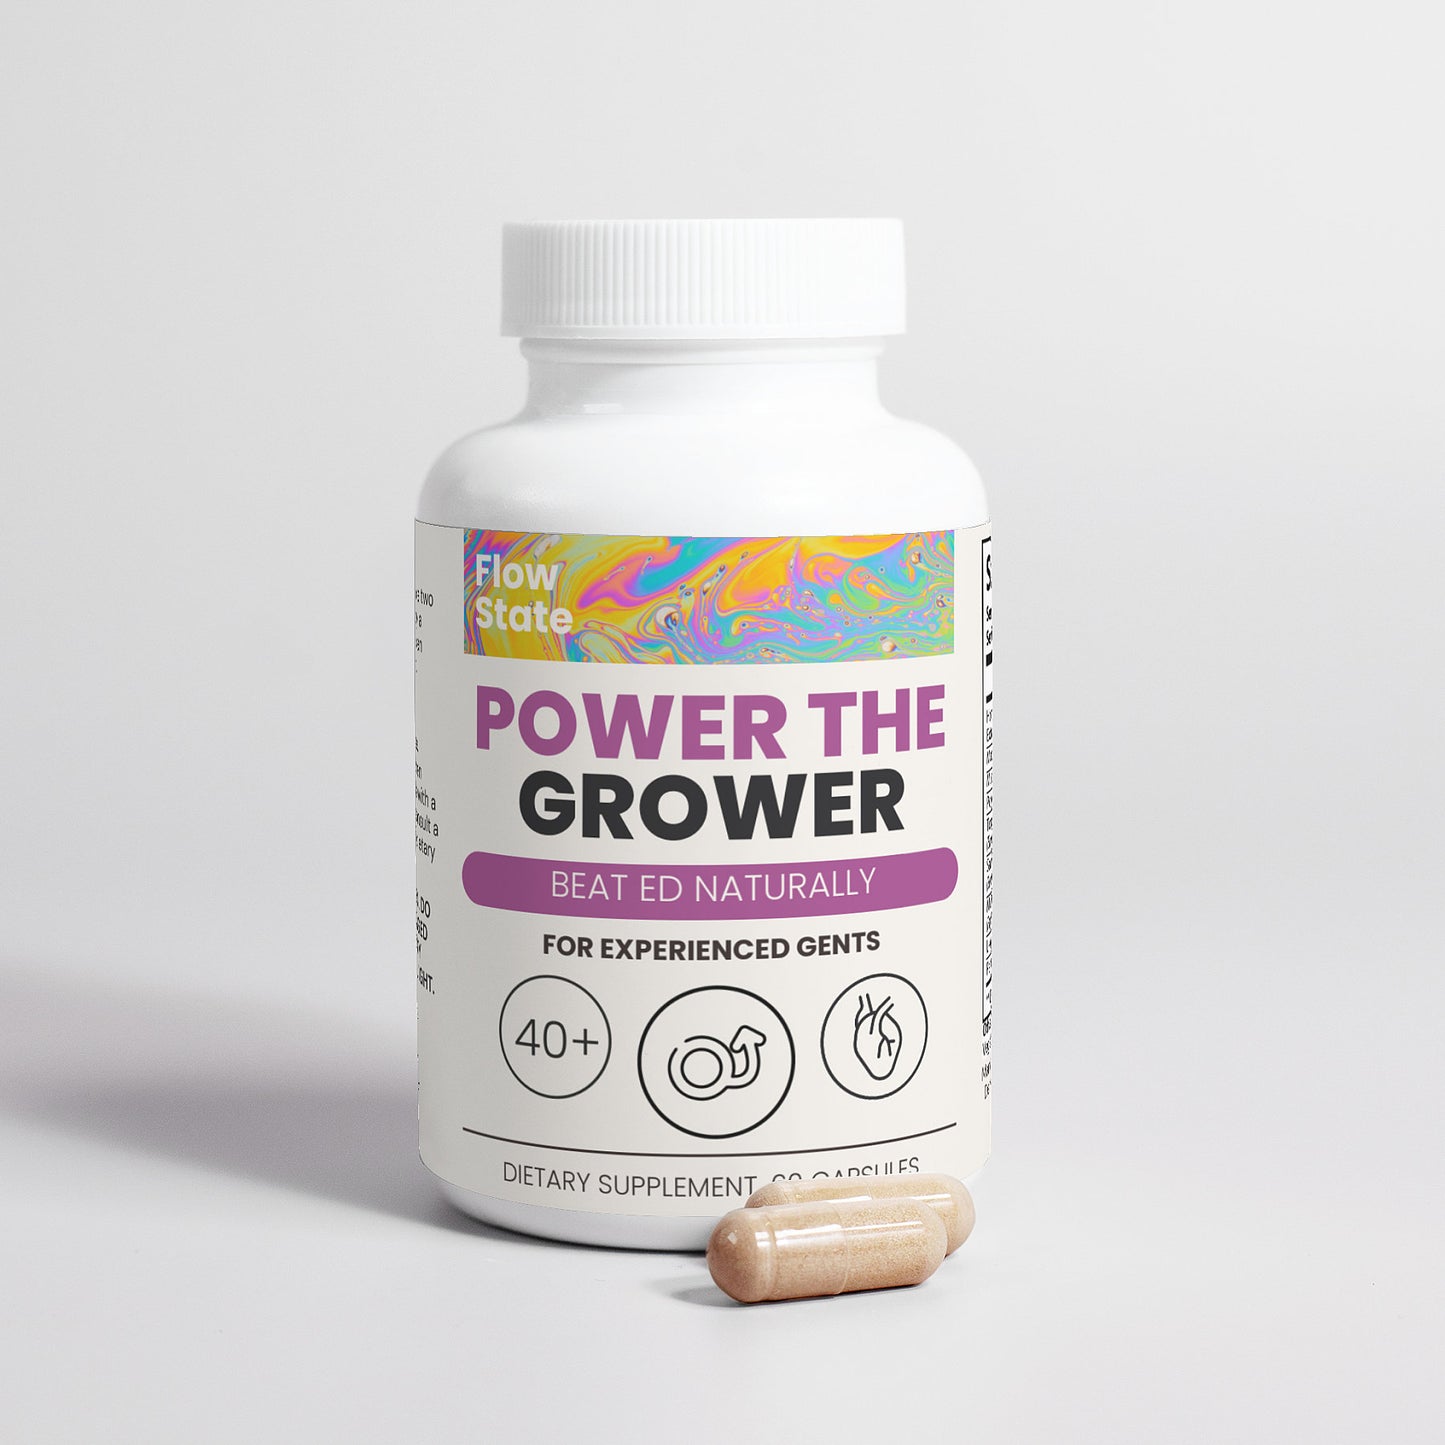 POWER THE GROWER FOR GENTS